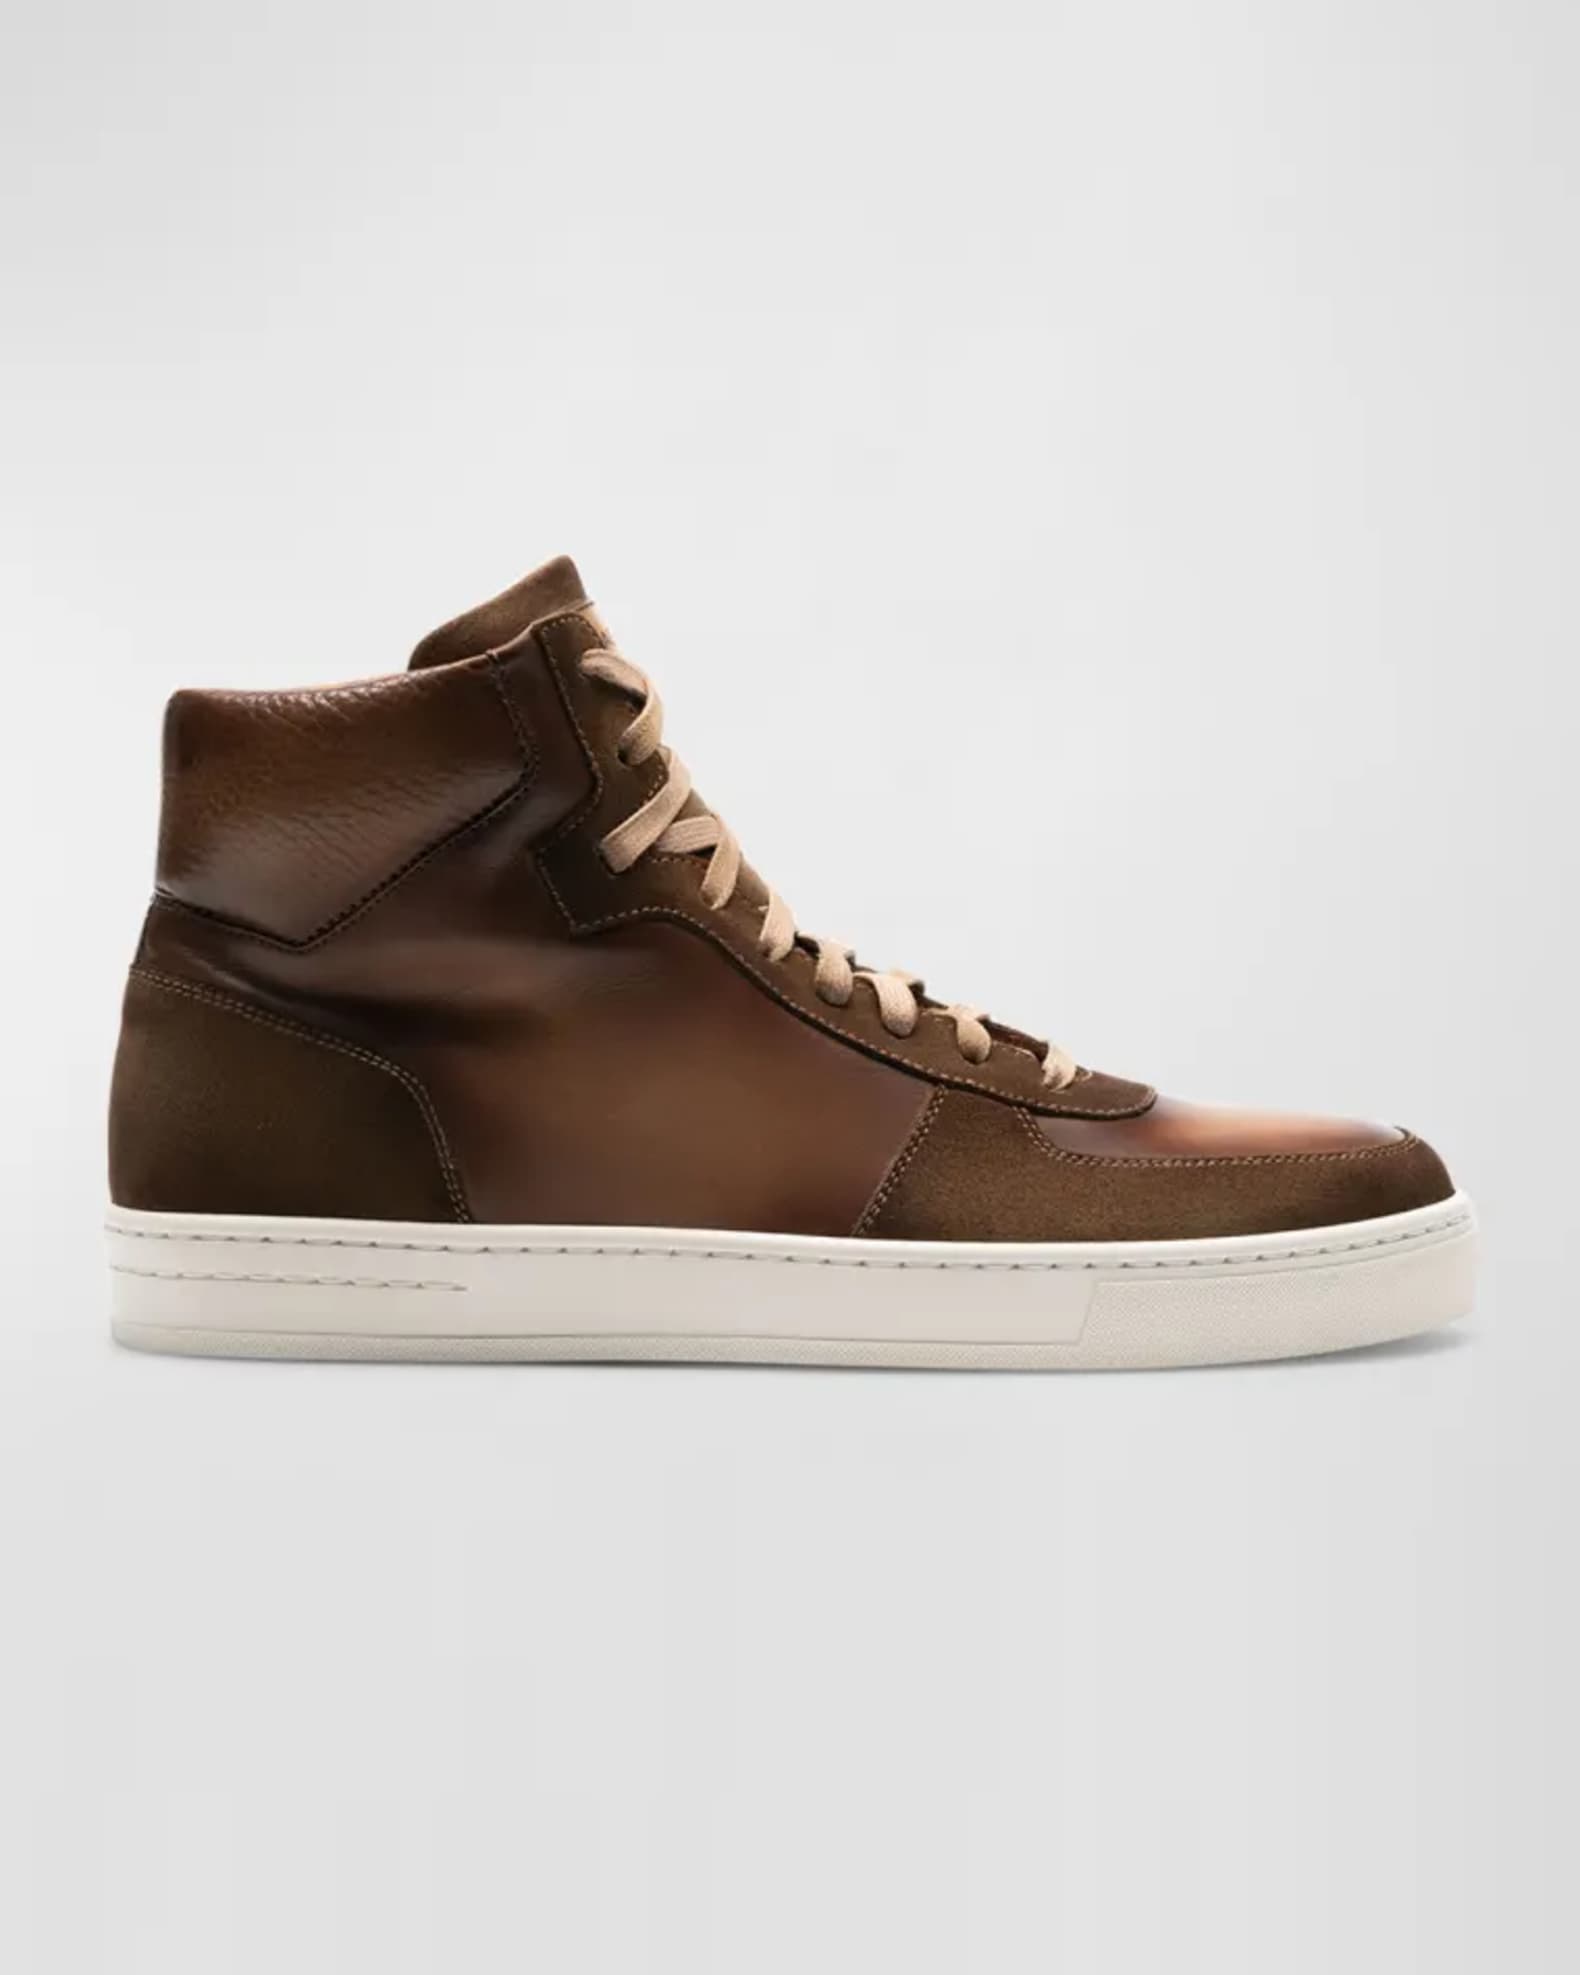 Magnanni Men's Rubio Leather & Suede High-Top Sneakers | Neiman Marcus